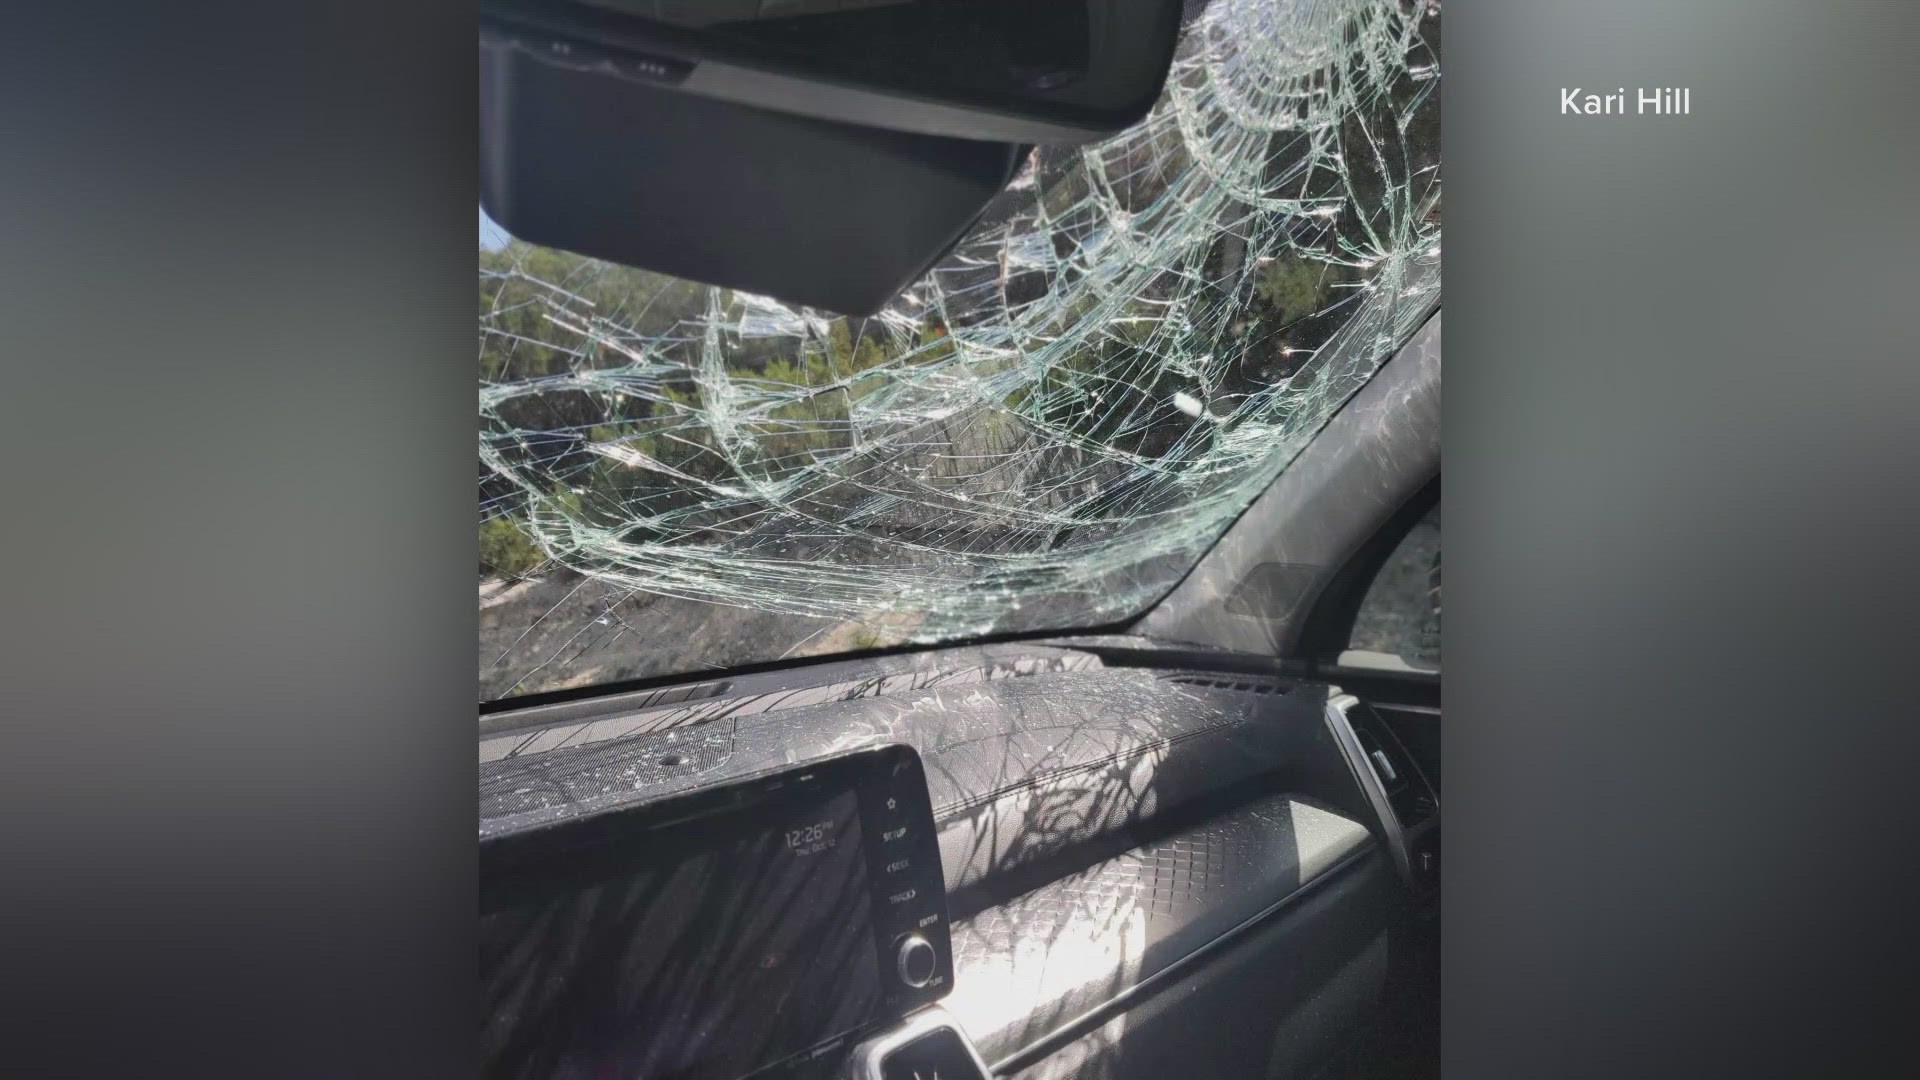 Kari Hill says her family was touring the animal facility when a giraffe peeked its head through her car's sunroof, lost its footing and fell onto her windshield.